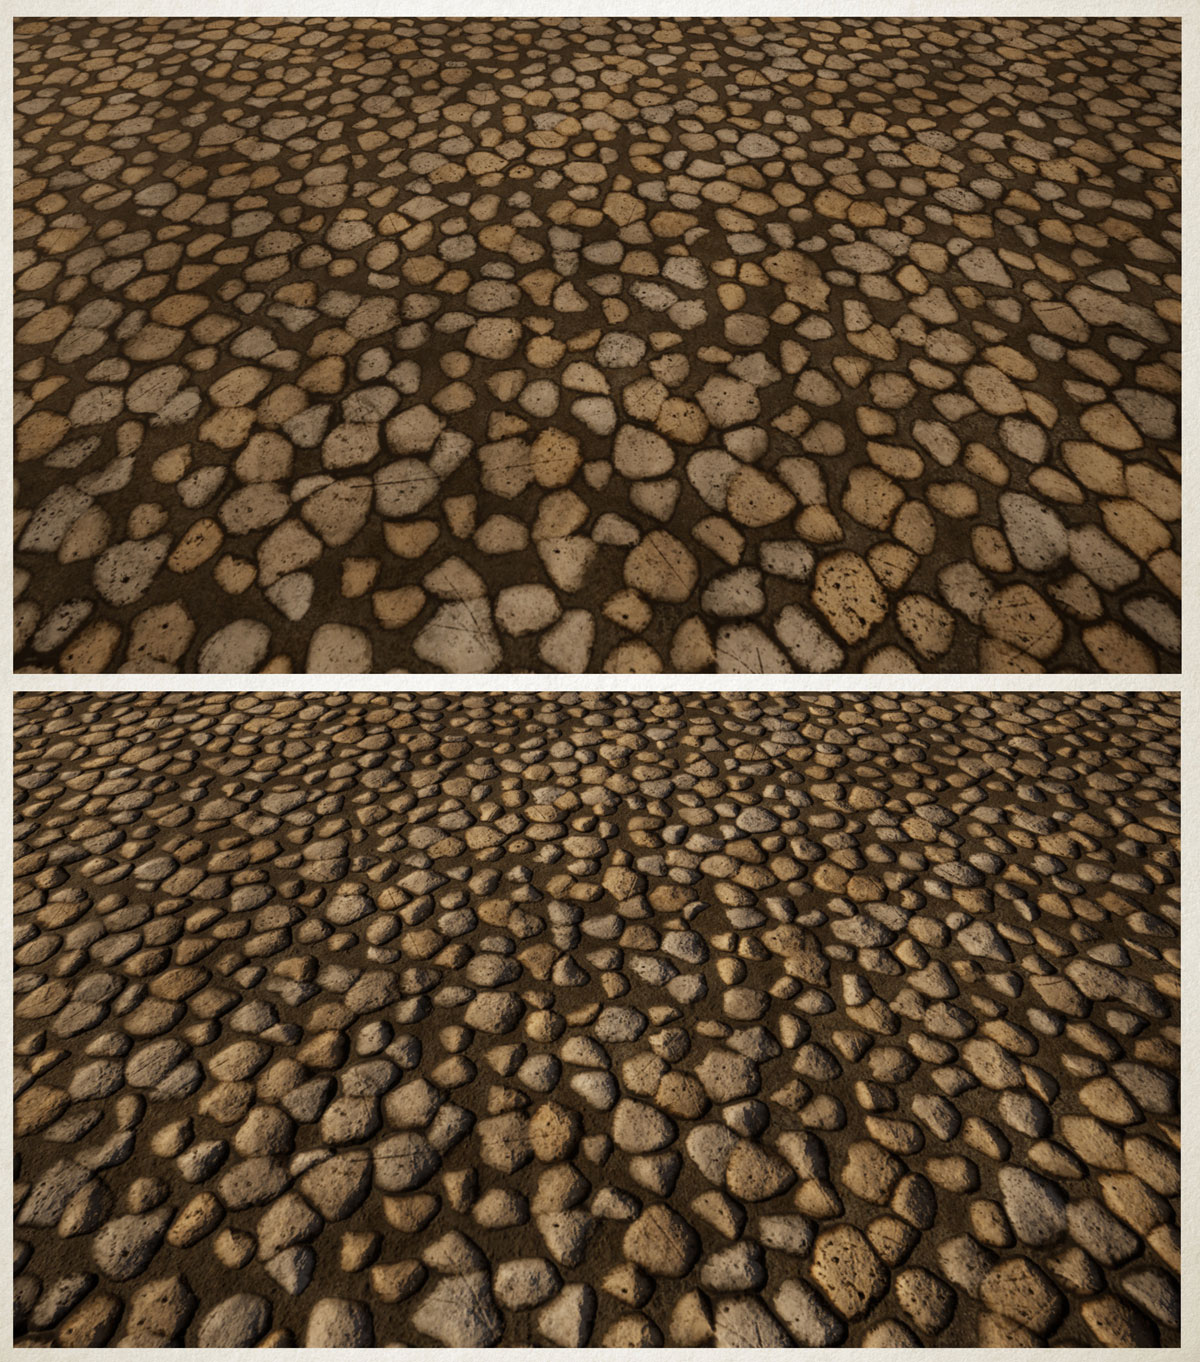 image of textured surfaces for 3D garden design